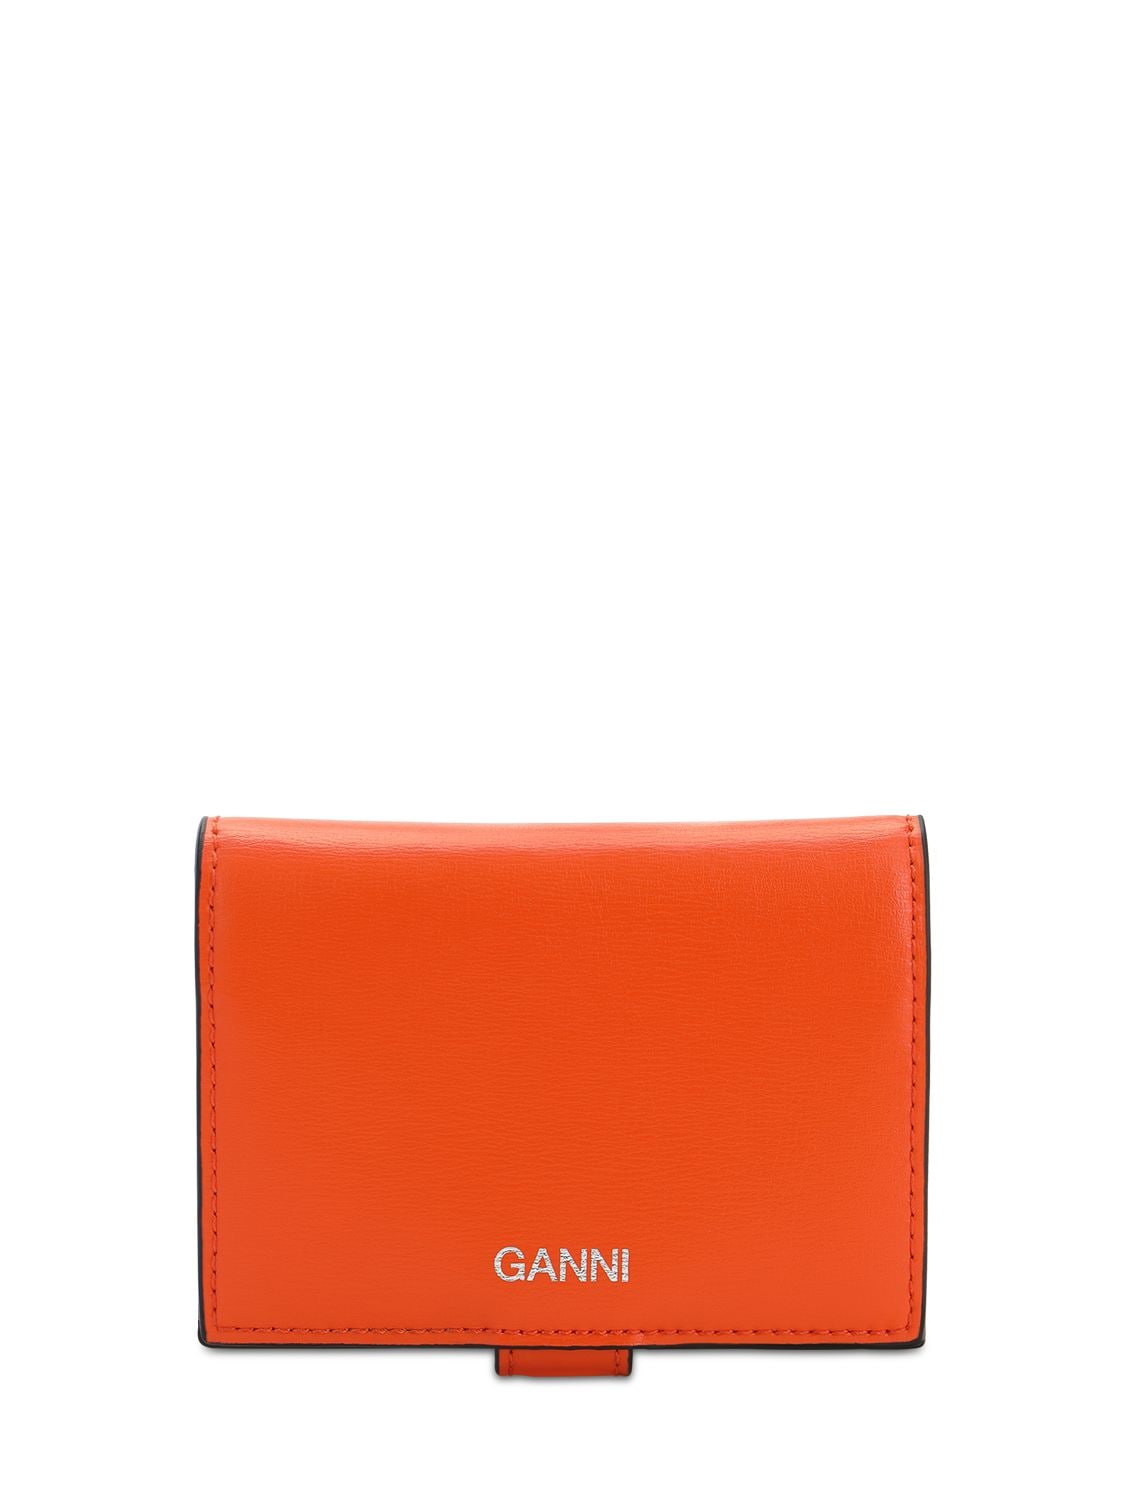 GANNI SMOOTH LEATHER COMPACT WALLET,71IJ5W013-MZUW0